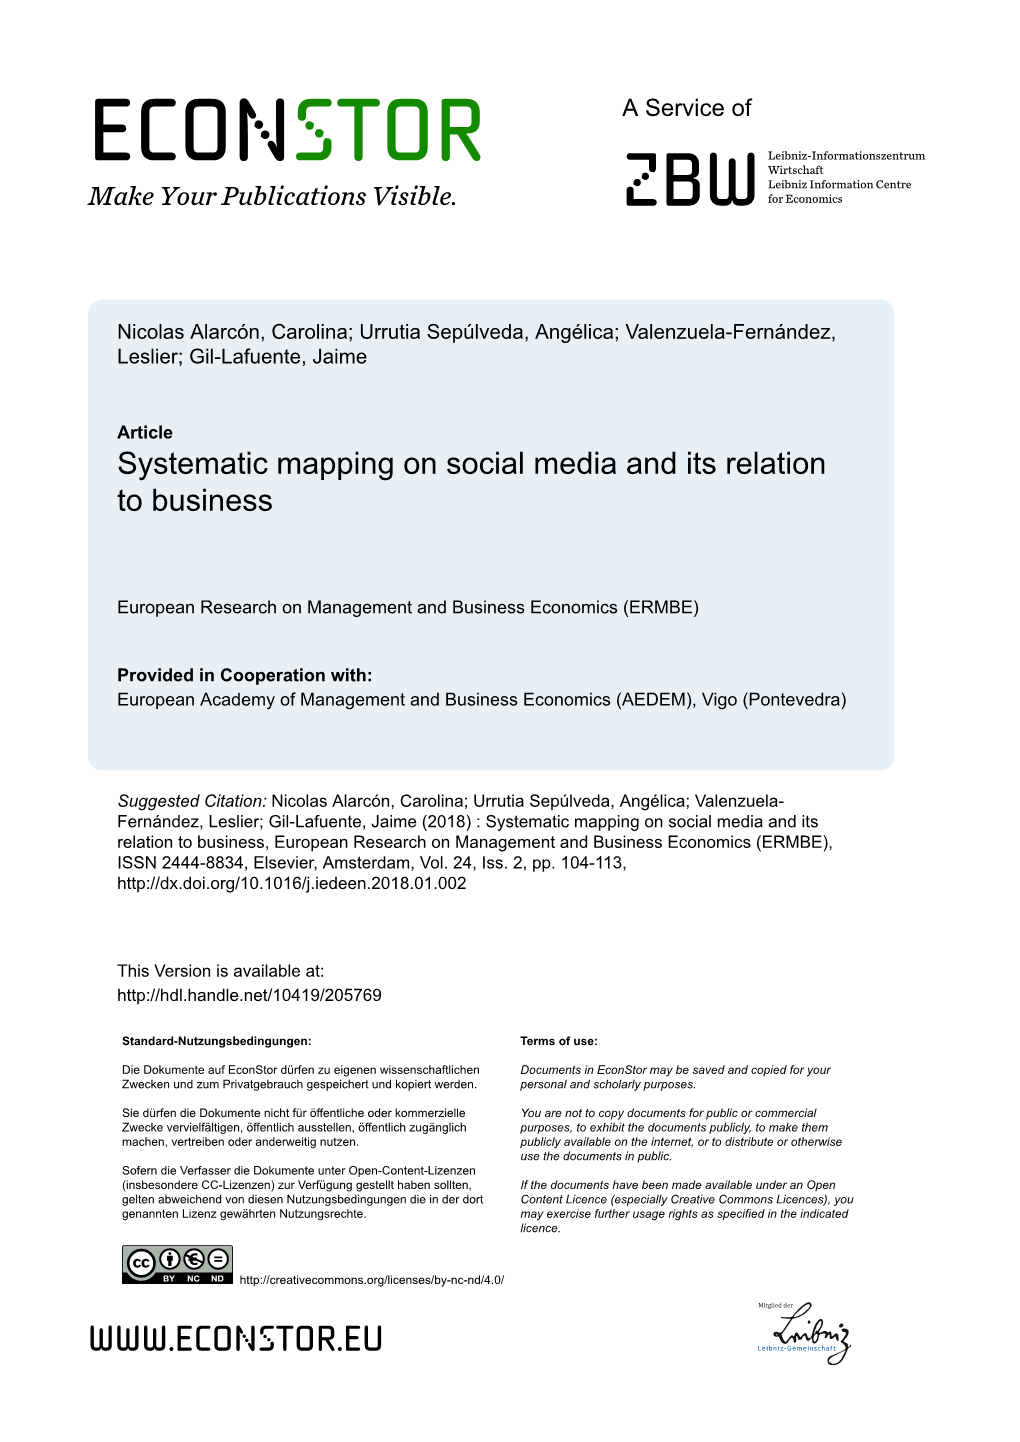 Systematic Mapping on Social Media and Its Relation to Business